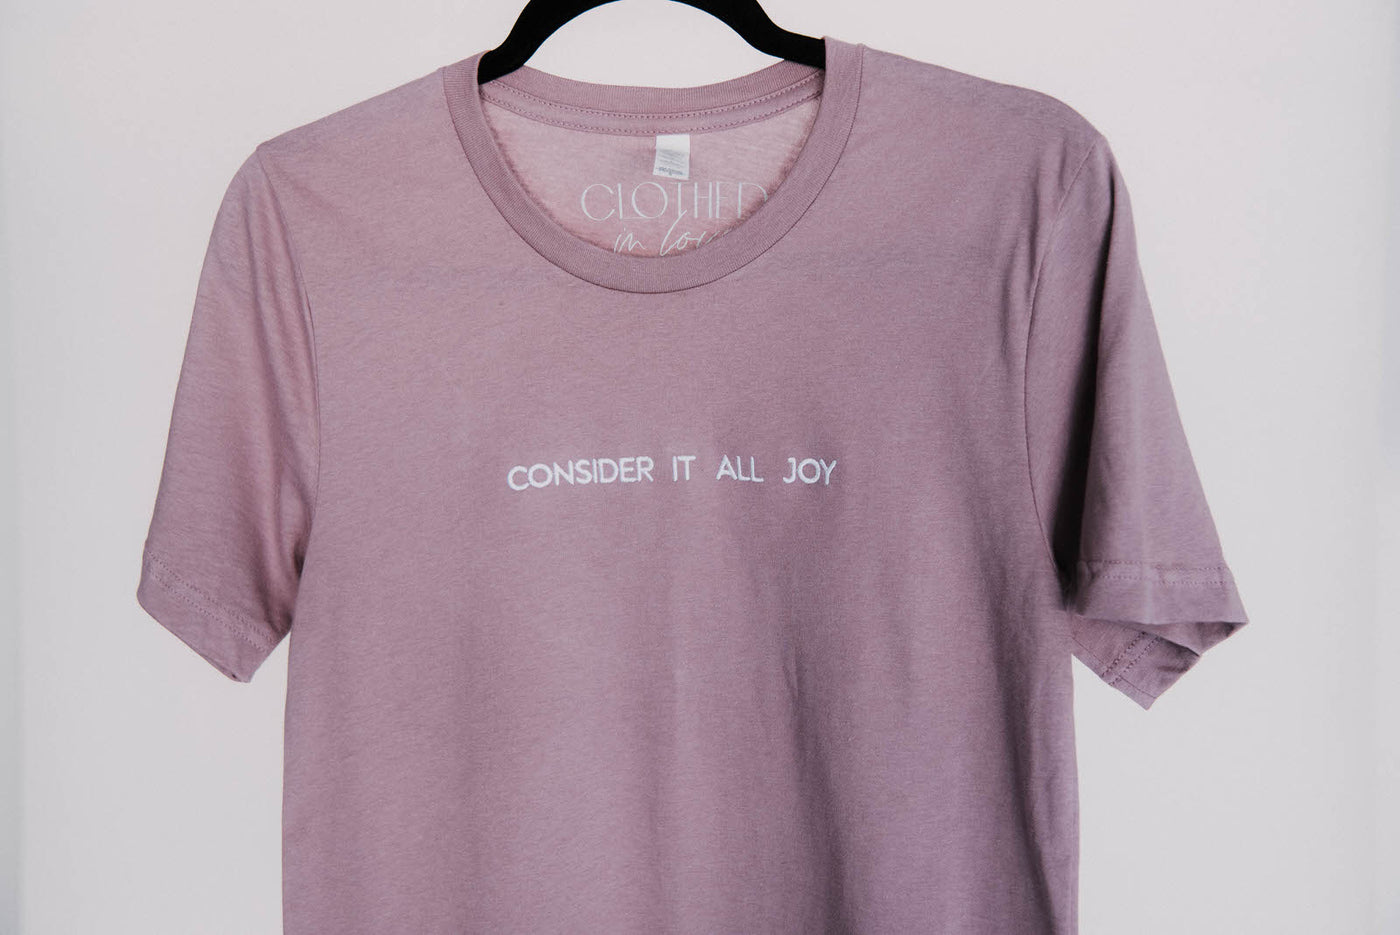 Consider It All Joy Embroidered Tee - Clothed in Love Boutique